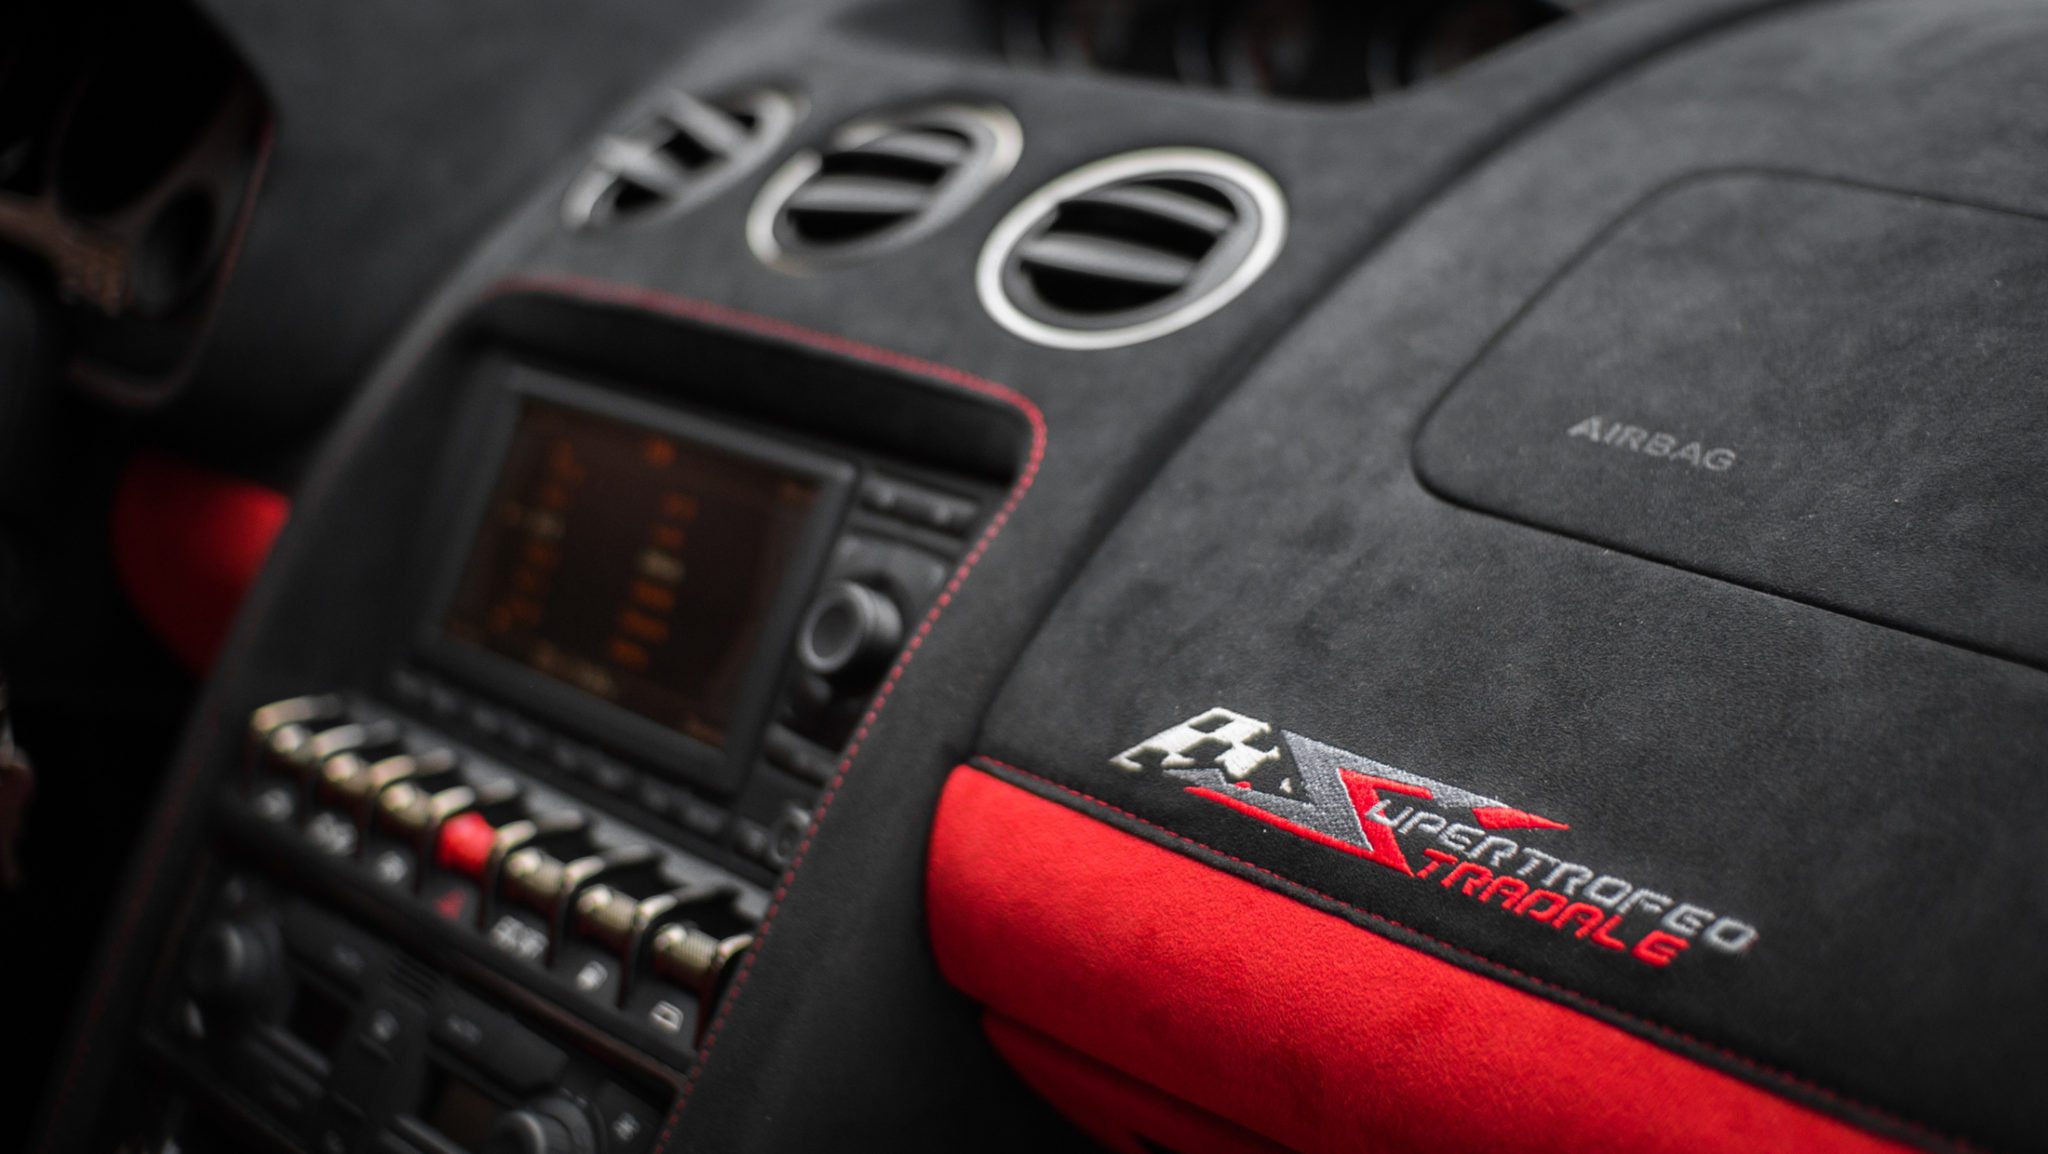 Image xtreme xperience super trofeo stradale interior super trofeo stradale badge